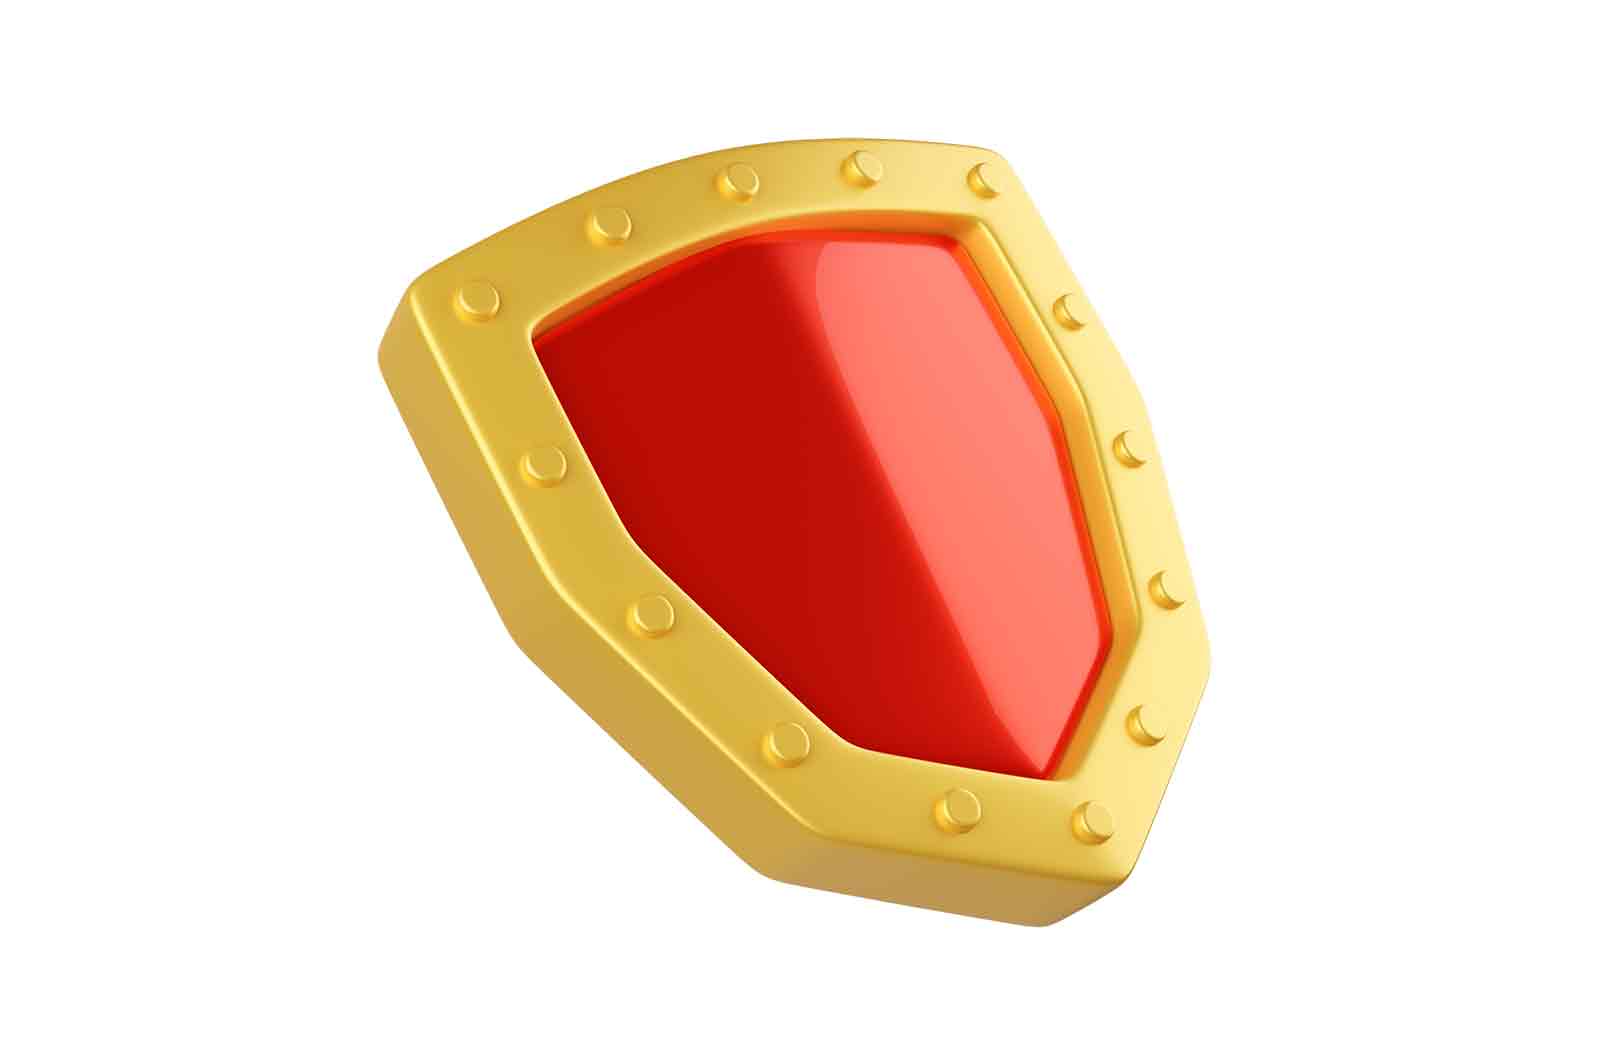 Gold shield with red center, 3d rendered illustration. Symbol of protection, security, or nobility.